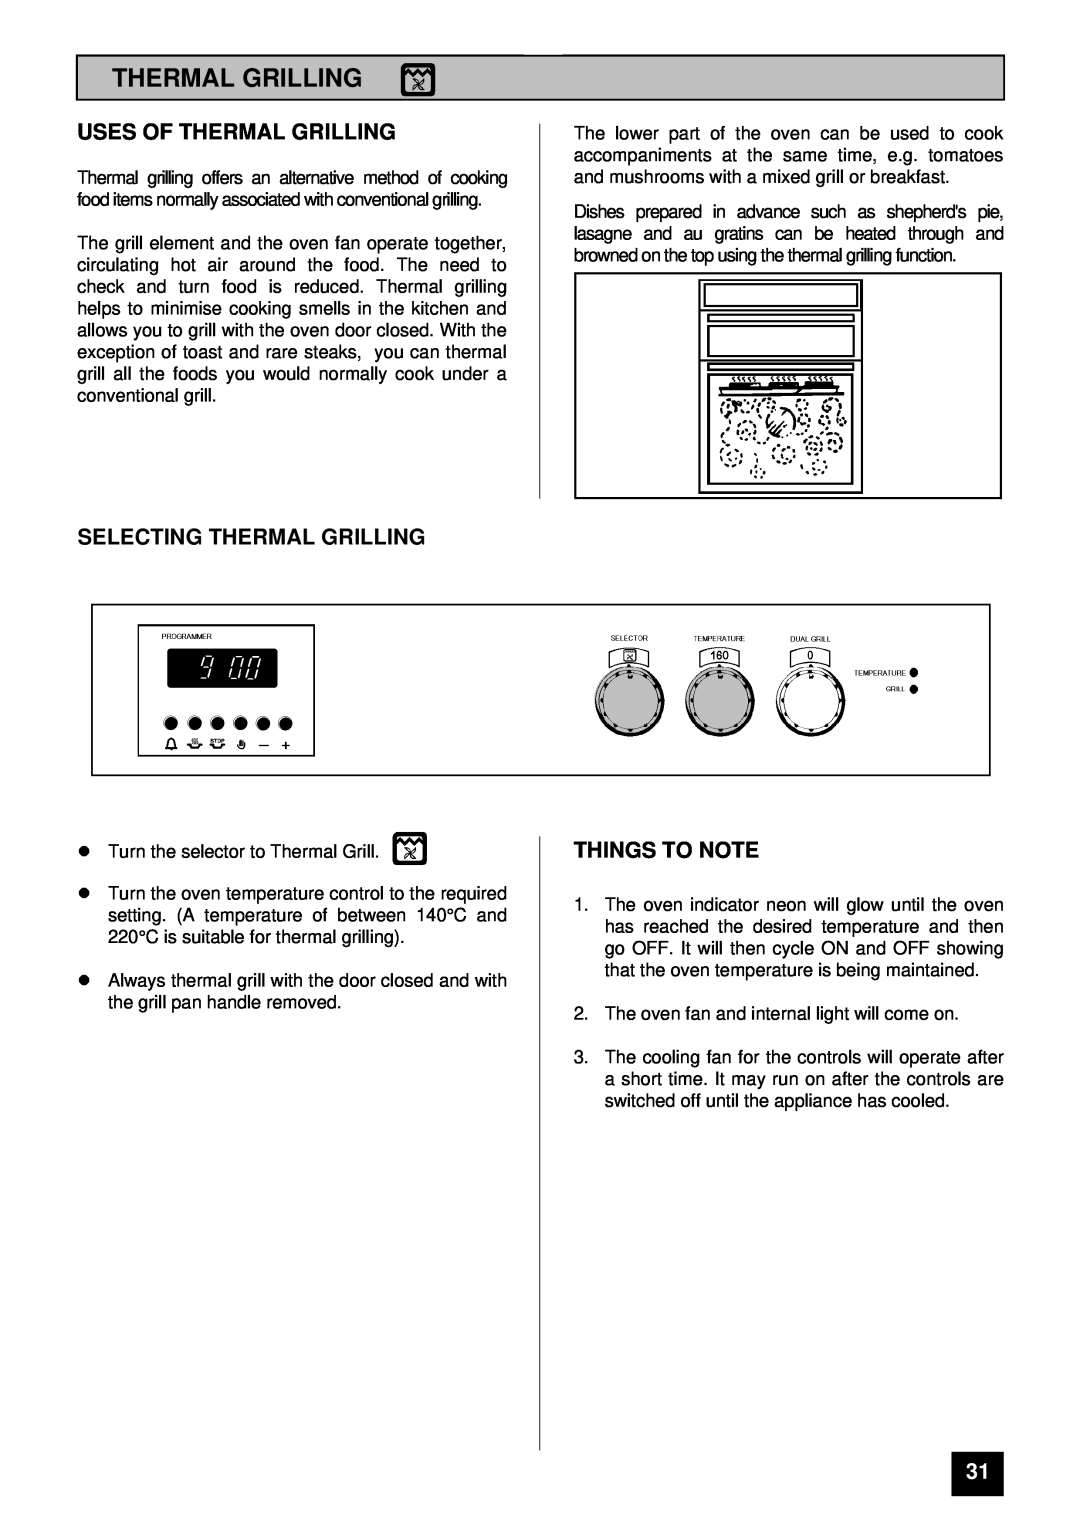 Tricity Bendix SURREY installation instructions Uses Of Thermal Grilling, Selecting Thermal Grilling, Things To Note 